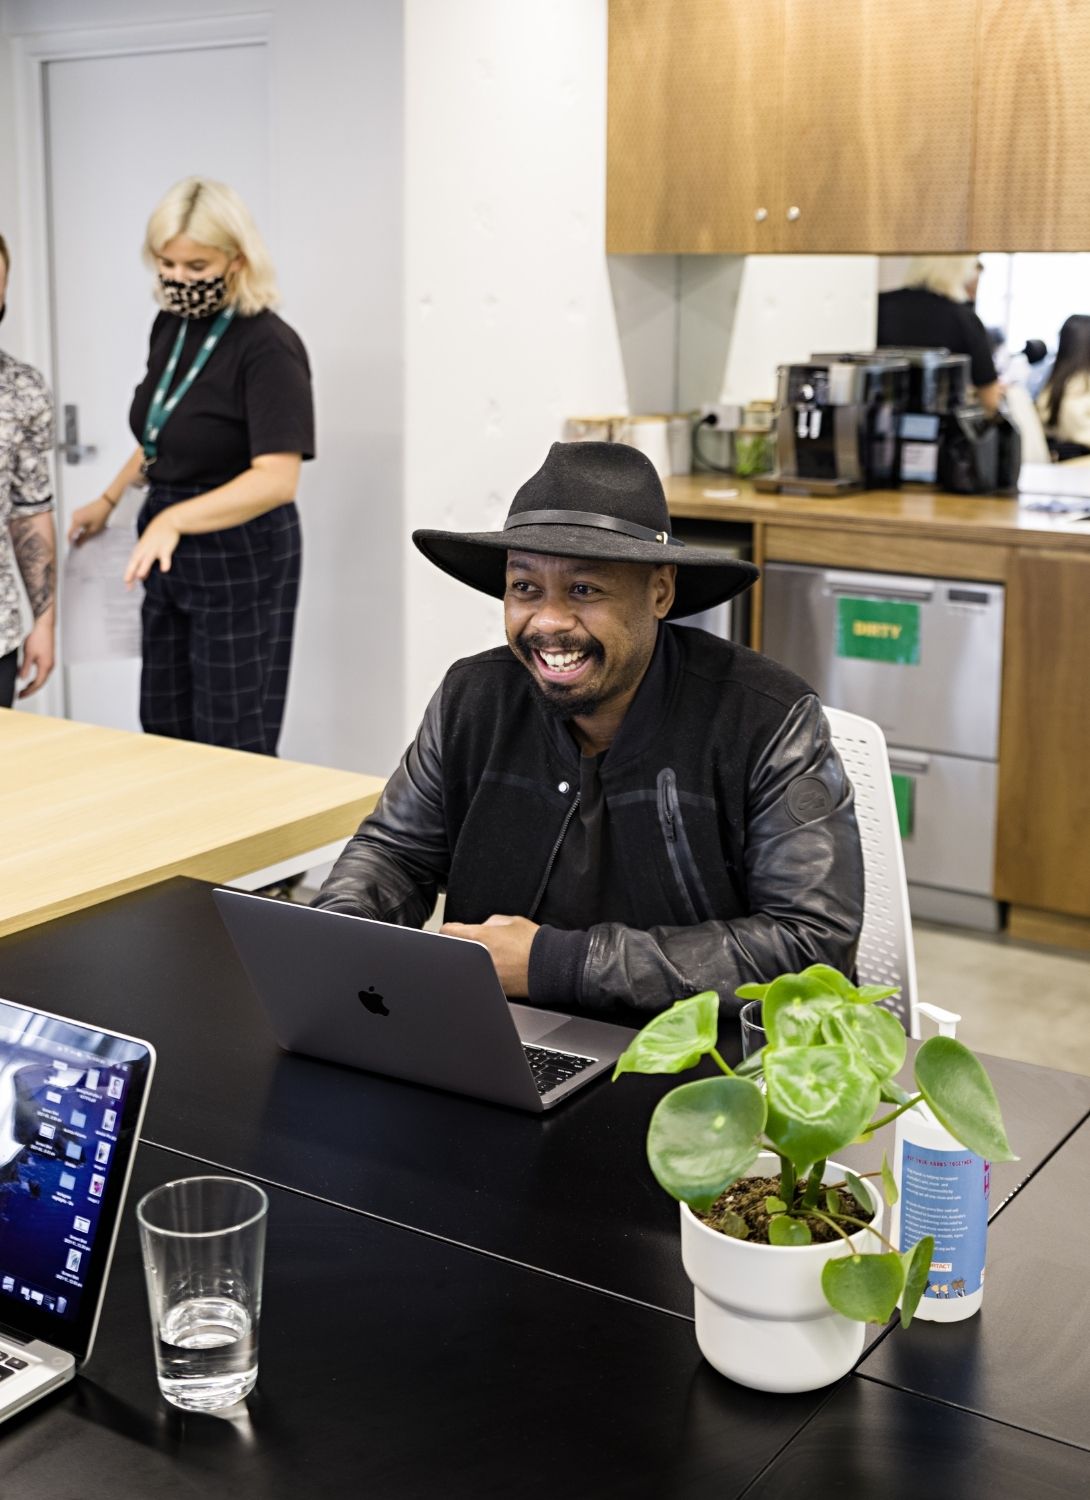 Photo of person working at a laptop in a co-work space, smiling across at another worker. There is a plant on the table. In the background to the left there are people standing, and to the right there is a kitchenette.